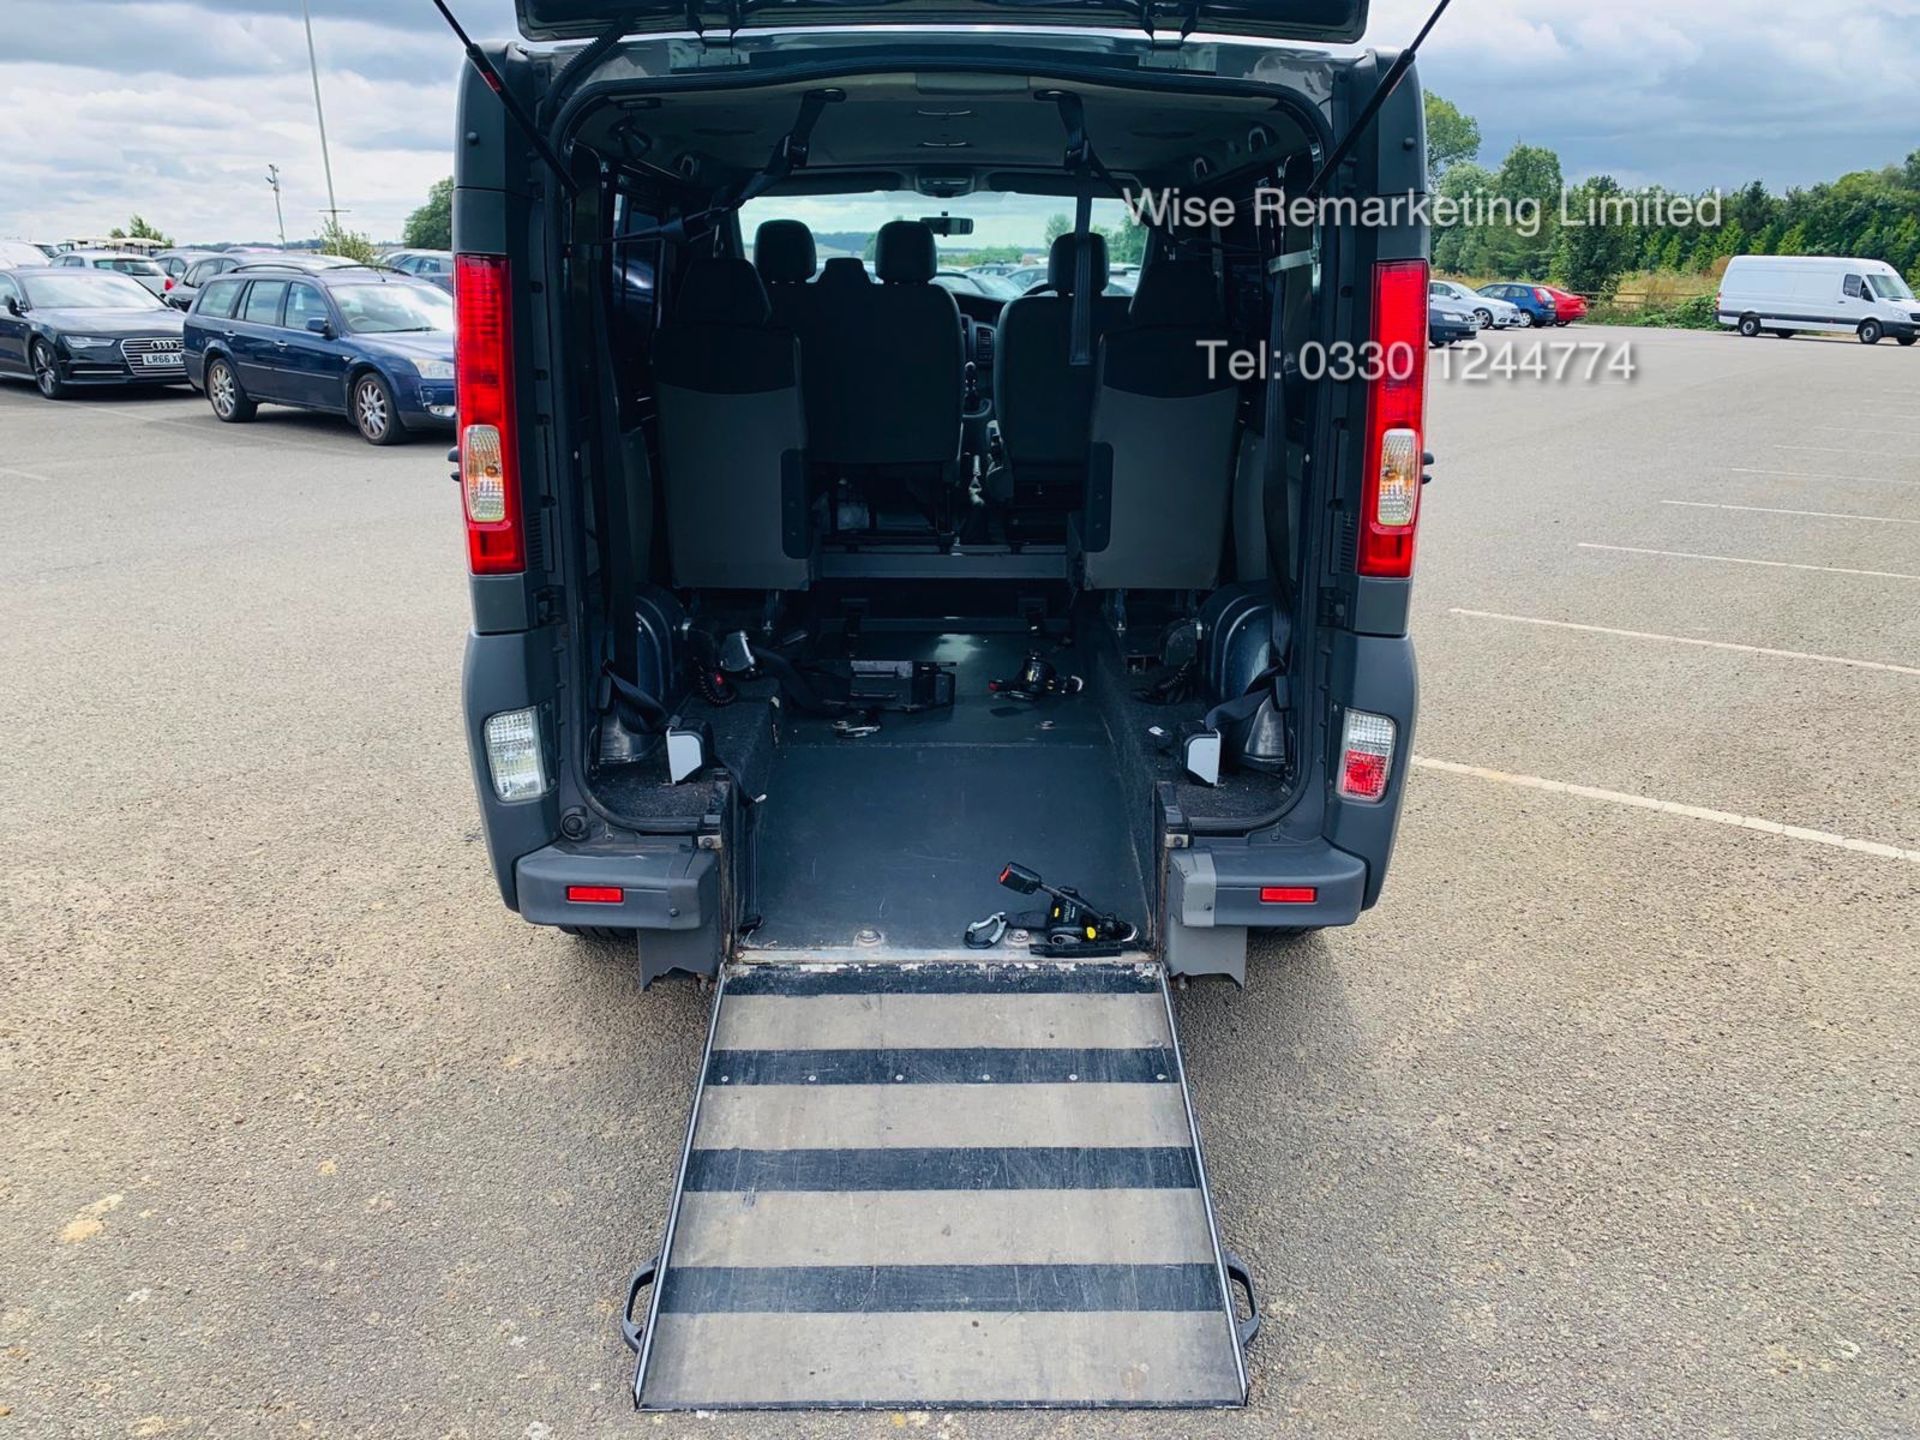 Vauxhall Vivaro 2.0 CDTI 2900 Minibus - 2014 Model - Wheel Chair Access -1 Owner From New -History - Image 16 of 21